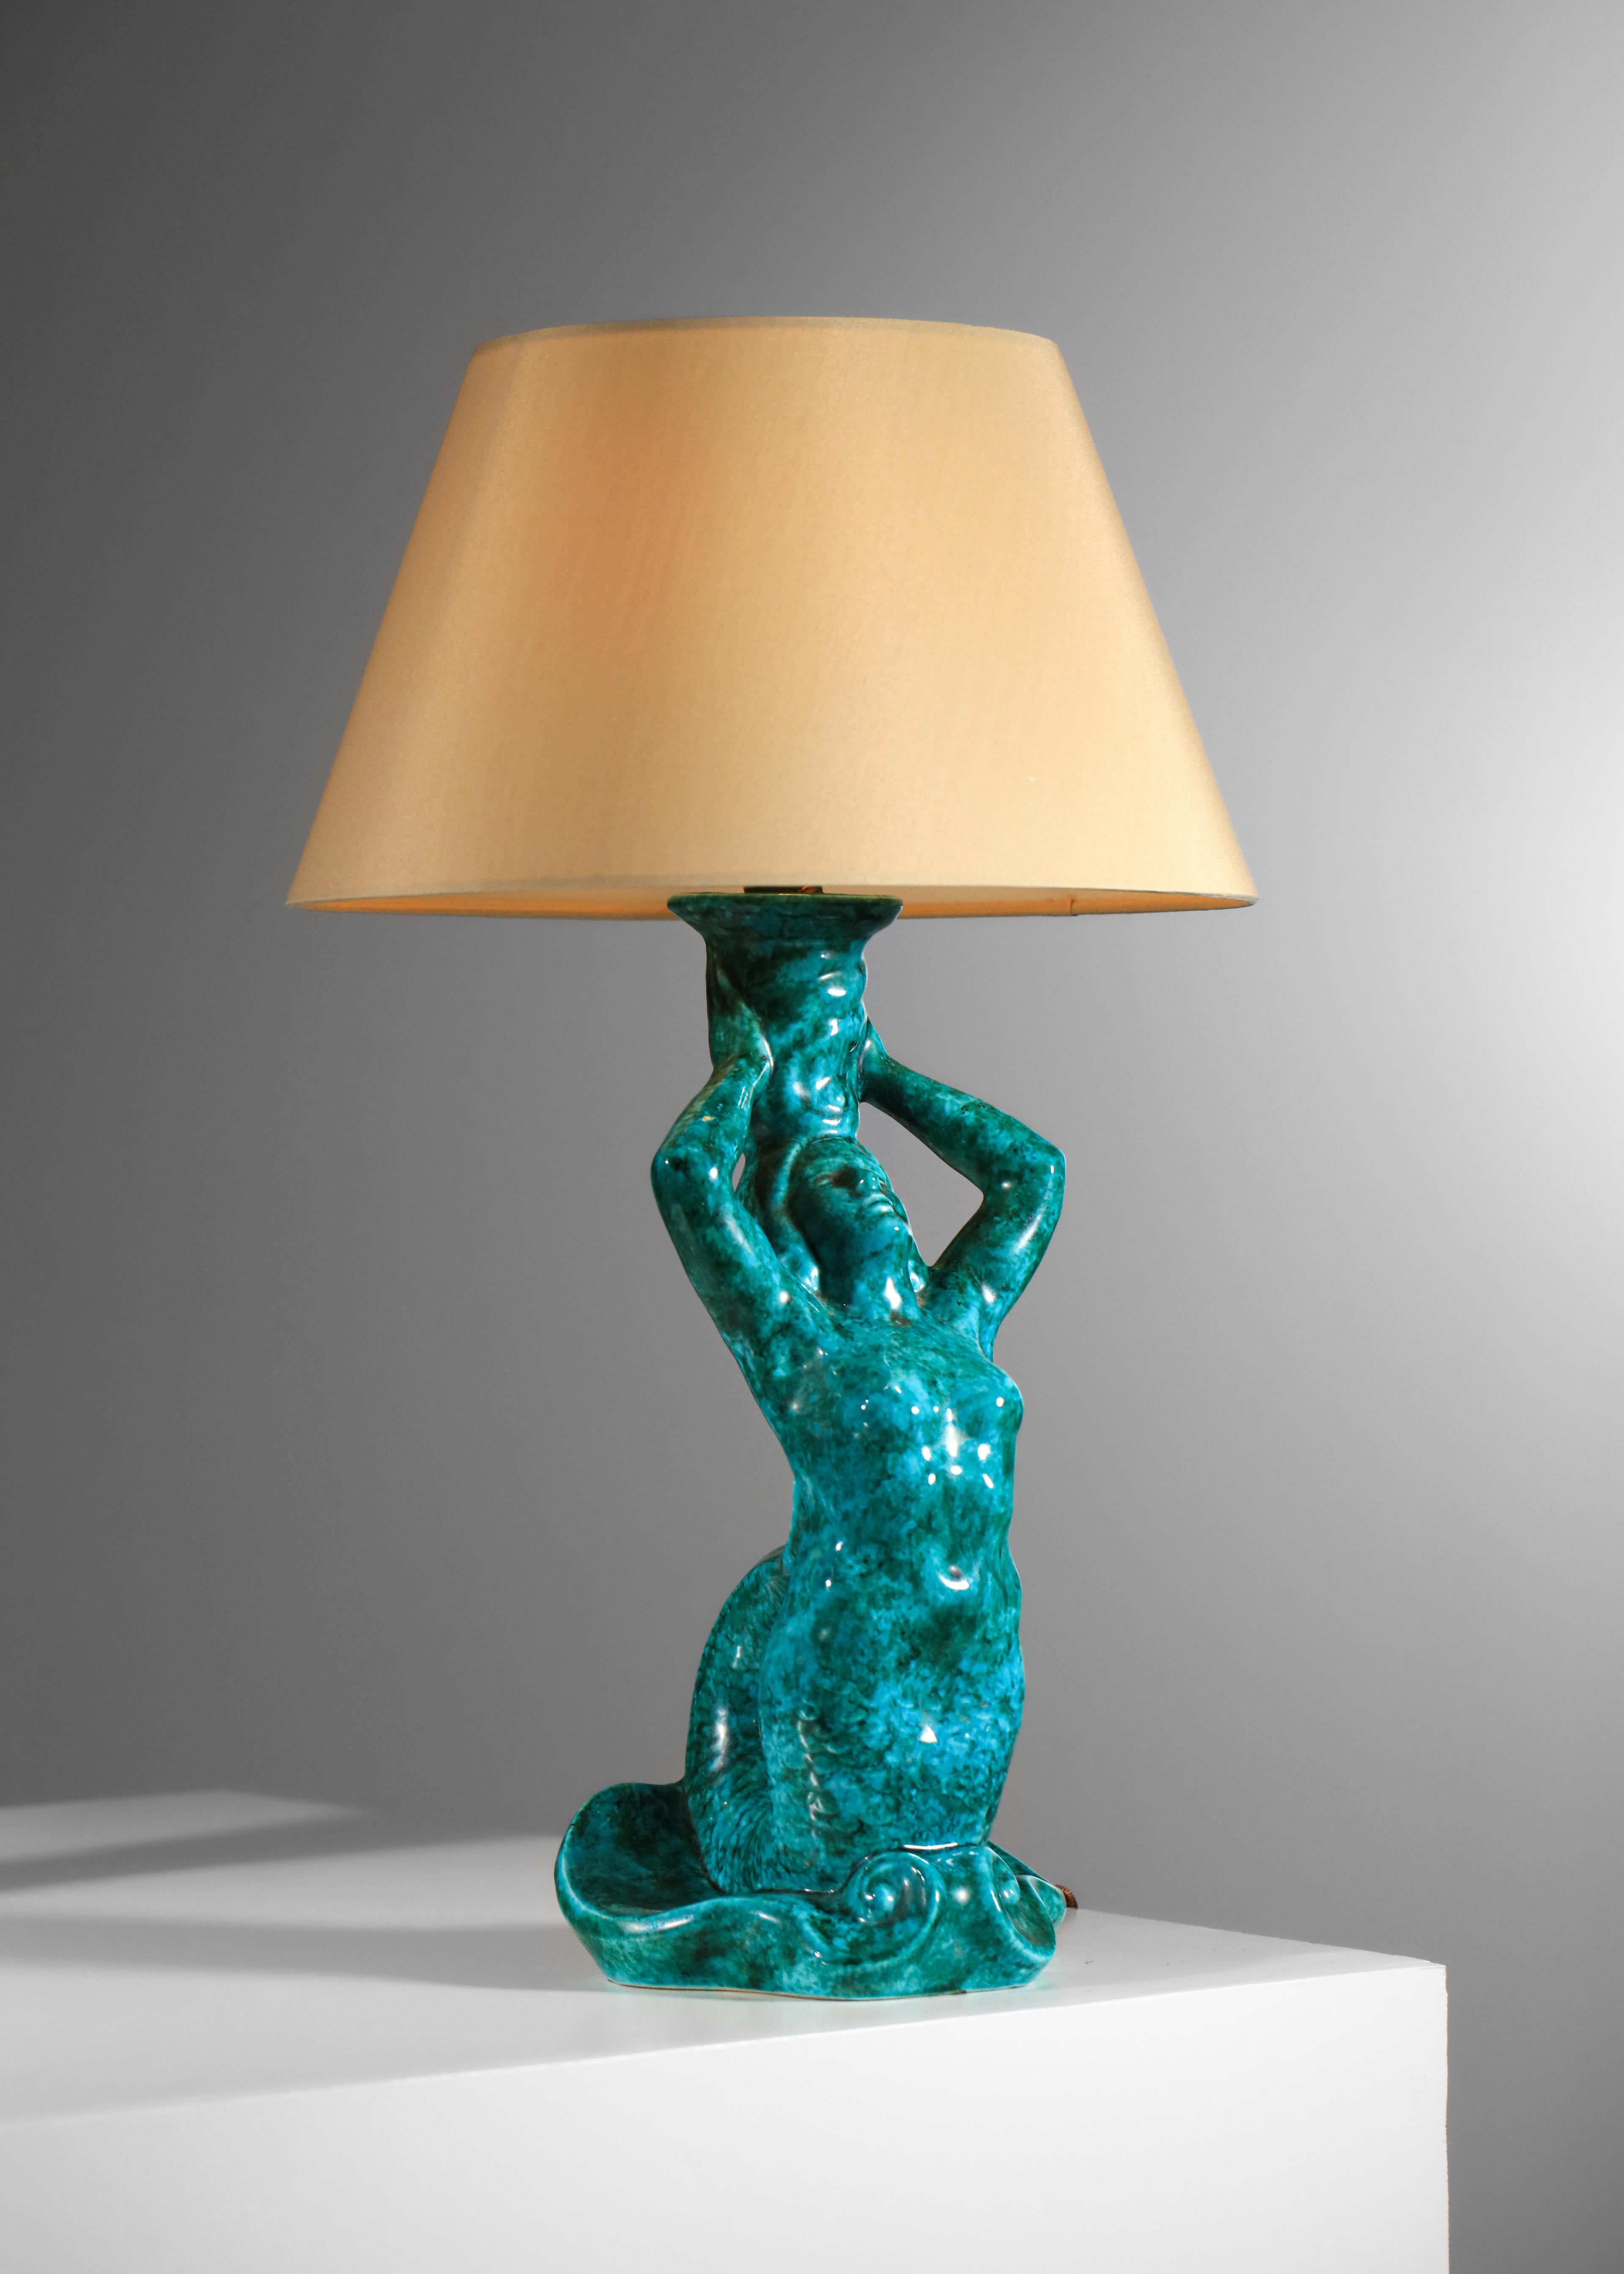 Pair of French table lamps from the 50s. Glazed earthenware bases in blue/green hues depicting a mermaid. Very decorative lamps, signed under the bases. Electrical system refurbished with original sockets, LED B22 bulbs recommended. Very nice